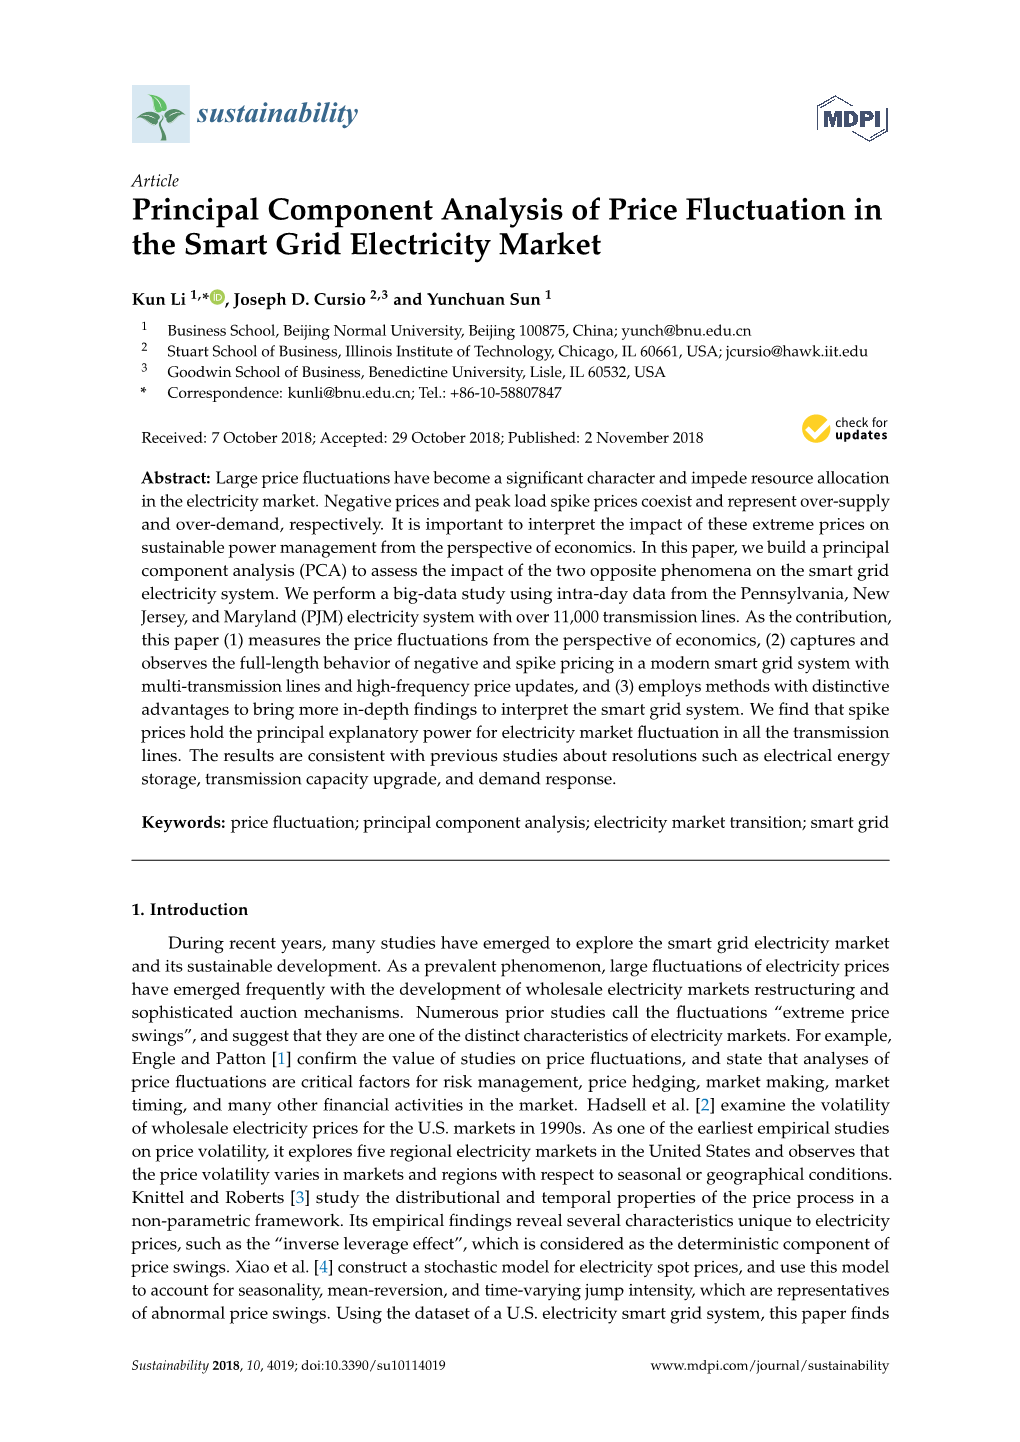 Principal Component Analysis of Price Fluctuation in the Smart Grid Electricity Market